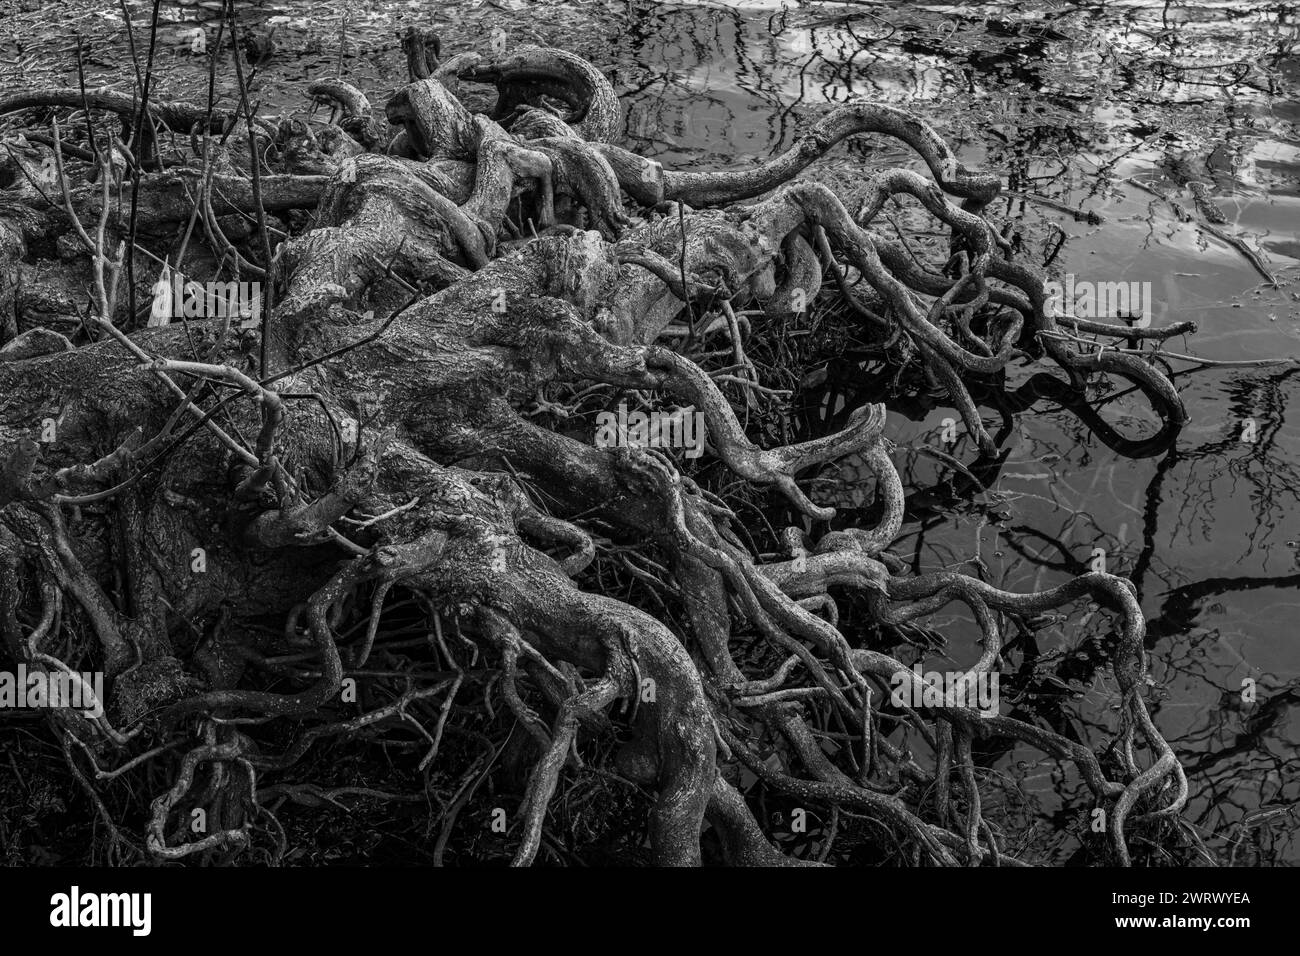 Black and white water with branches and roots. Branches and roots sinking into the water. Stock Photo